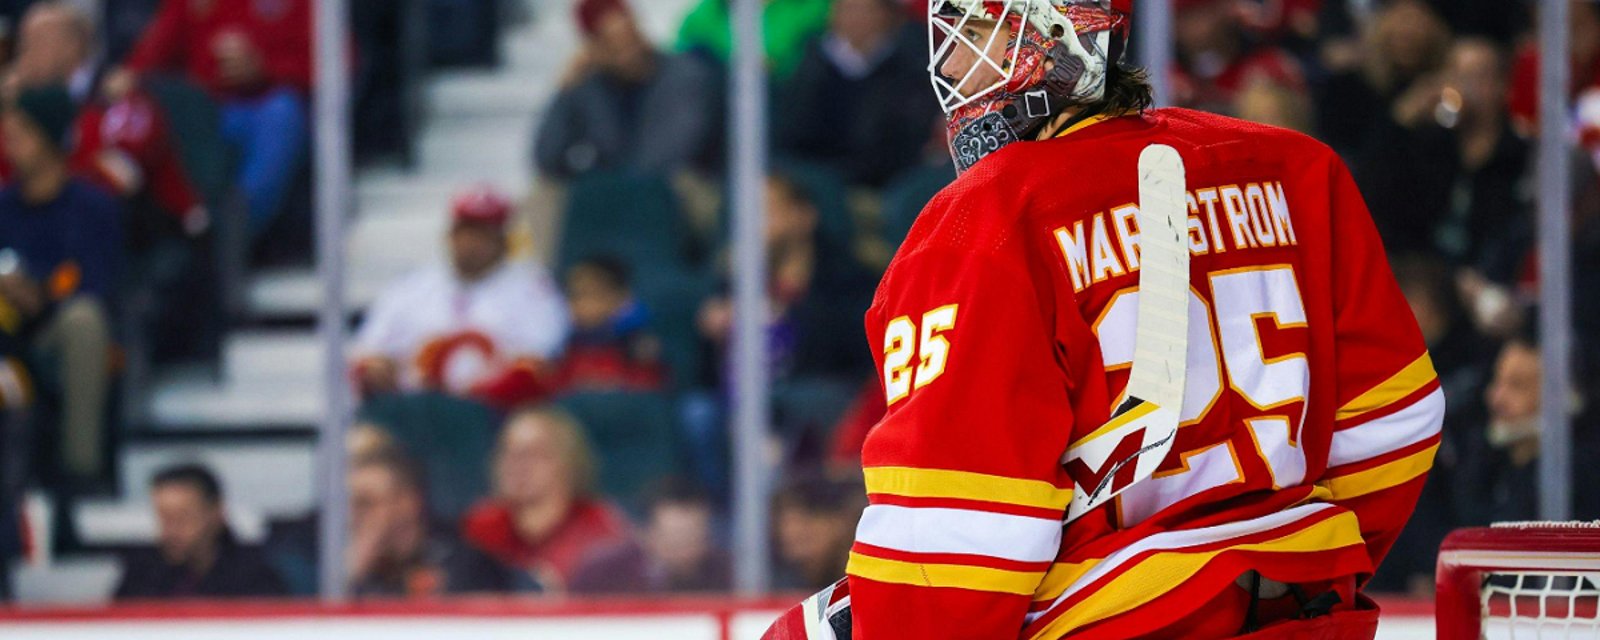 Flames sit Jacob Markstrom amidst buzz of trade rumors.